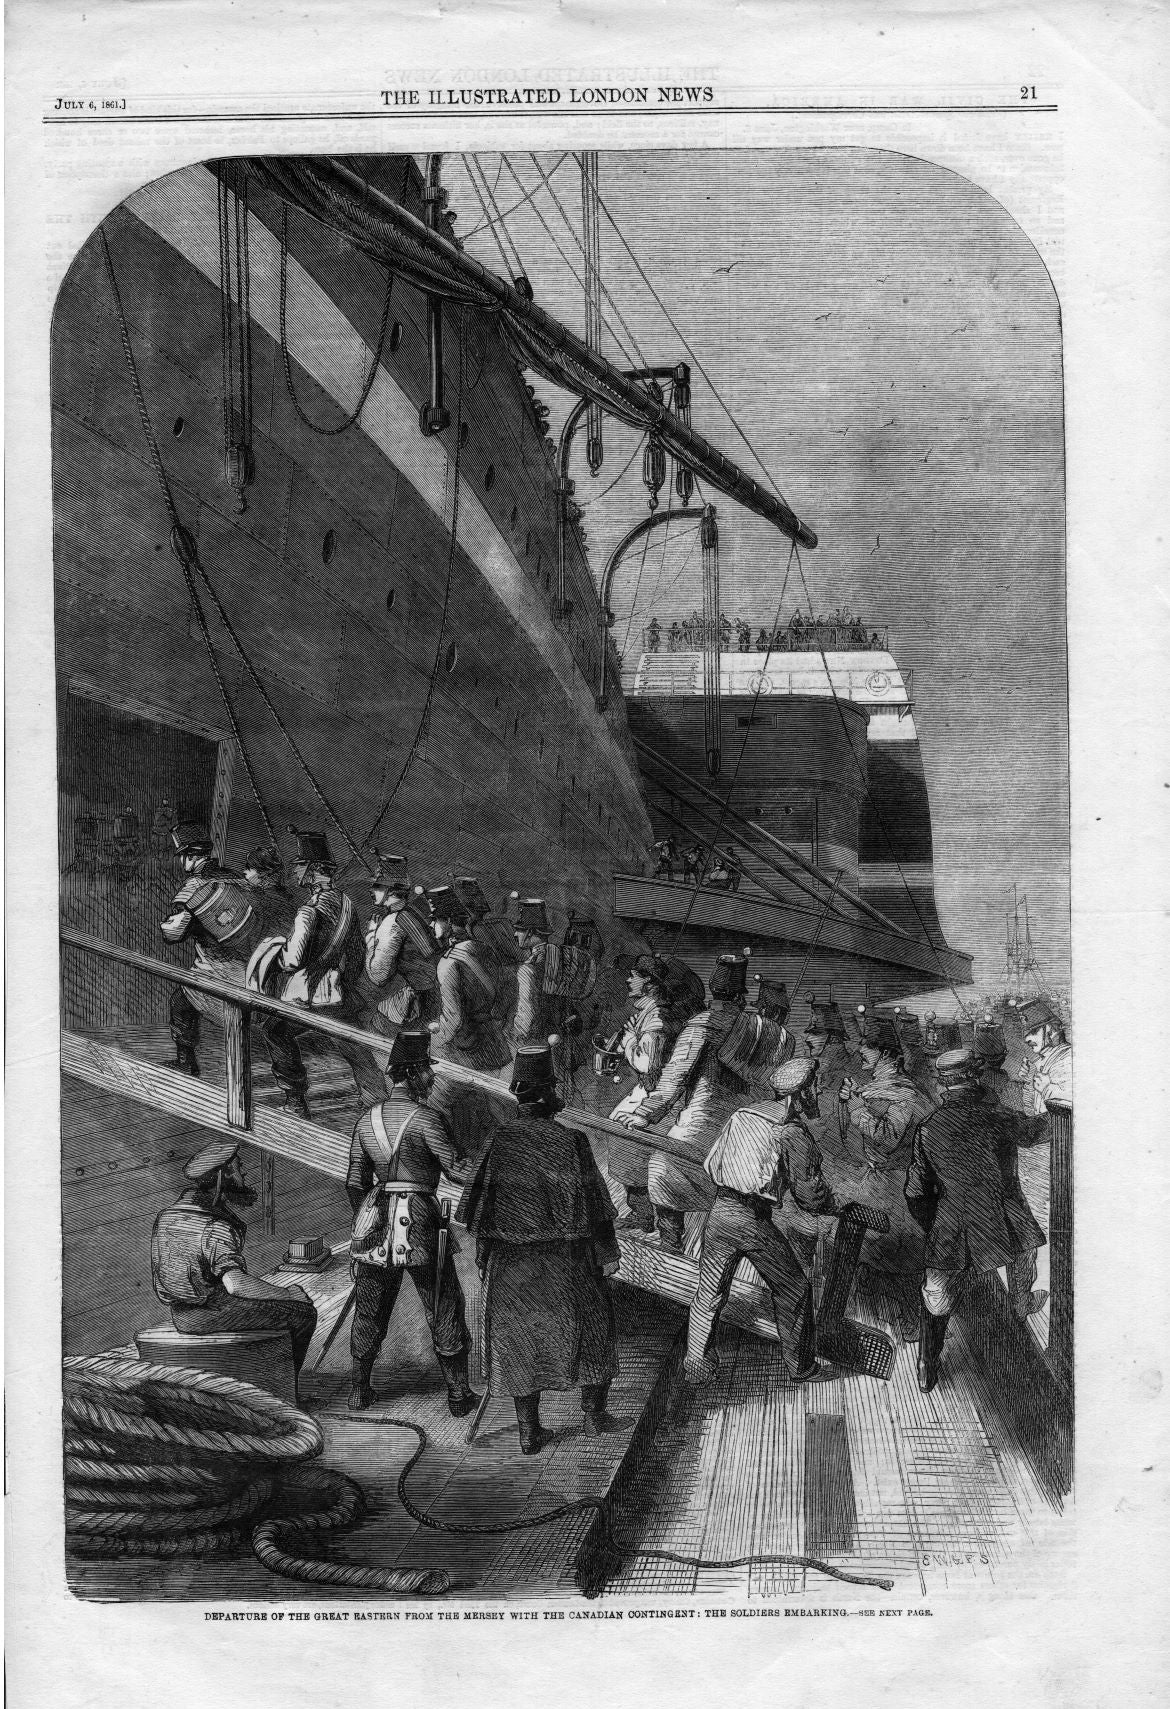 Canadian Contingent soldiers embarking on The Great Eastern for Canada 1861